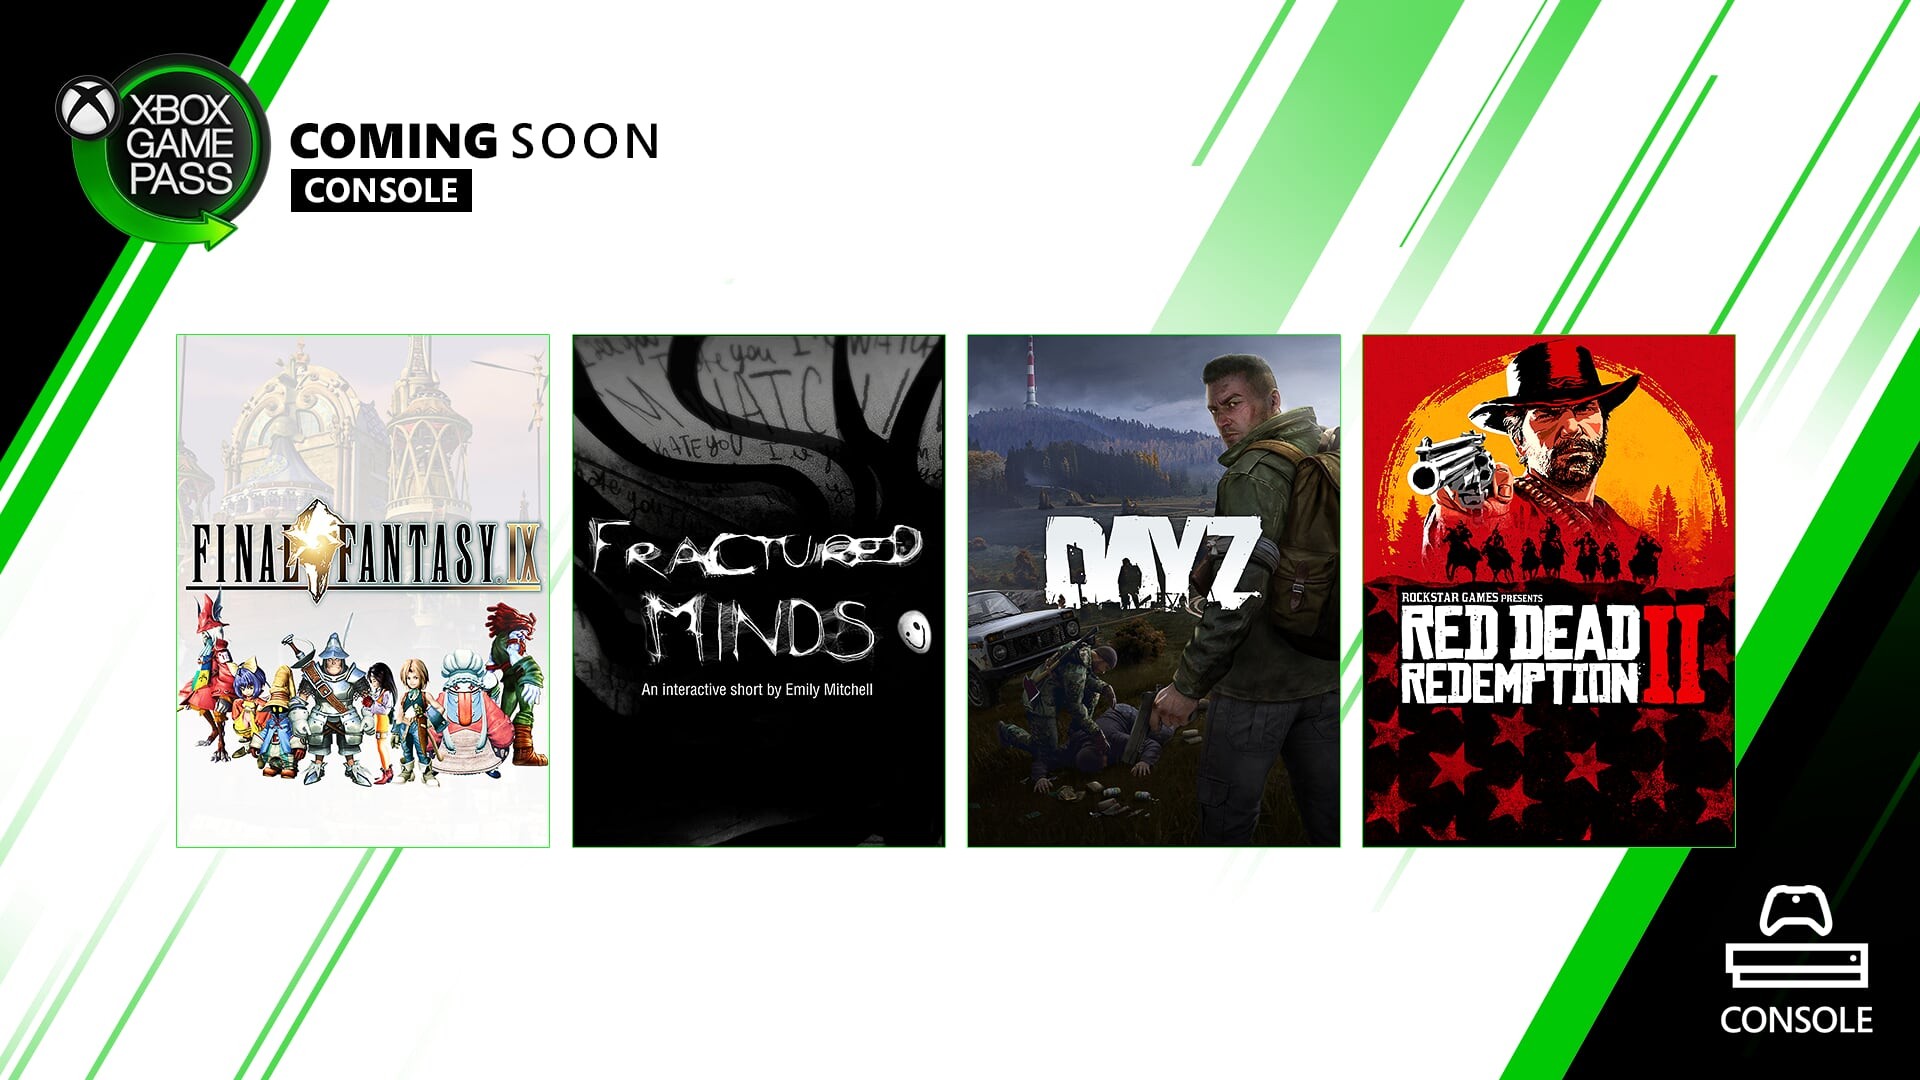 Xbox Game Pass - Console Coming Soon